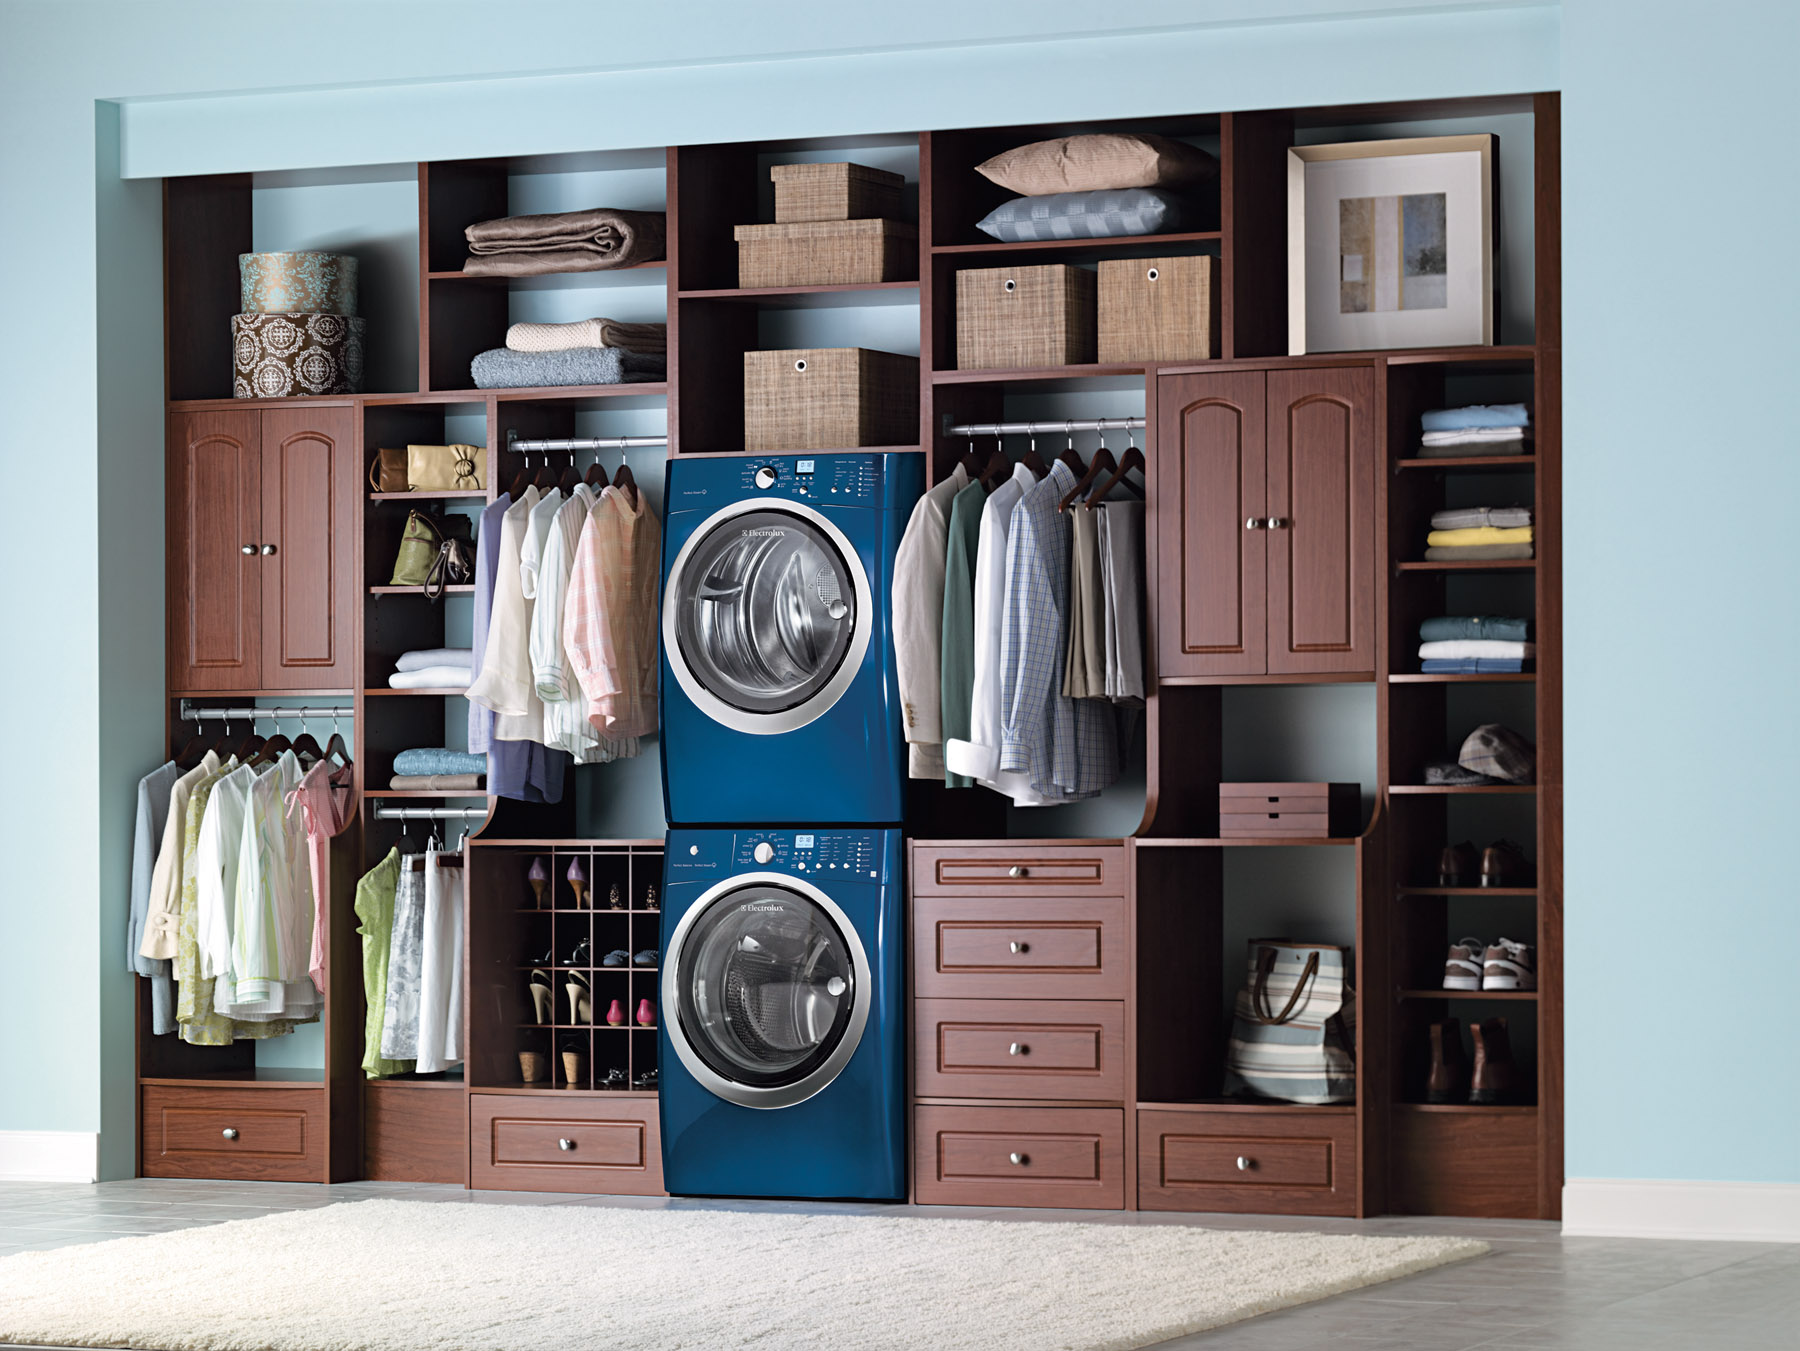 Creating Space in Your Laundry Room